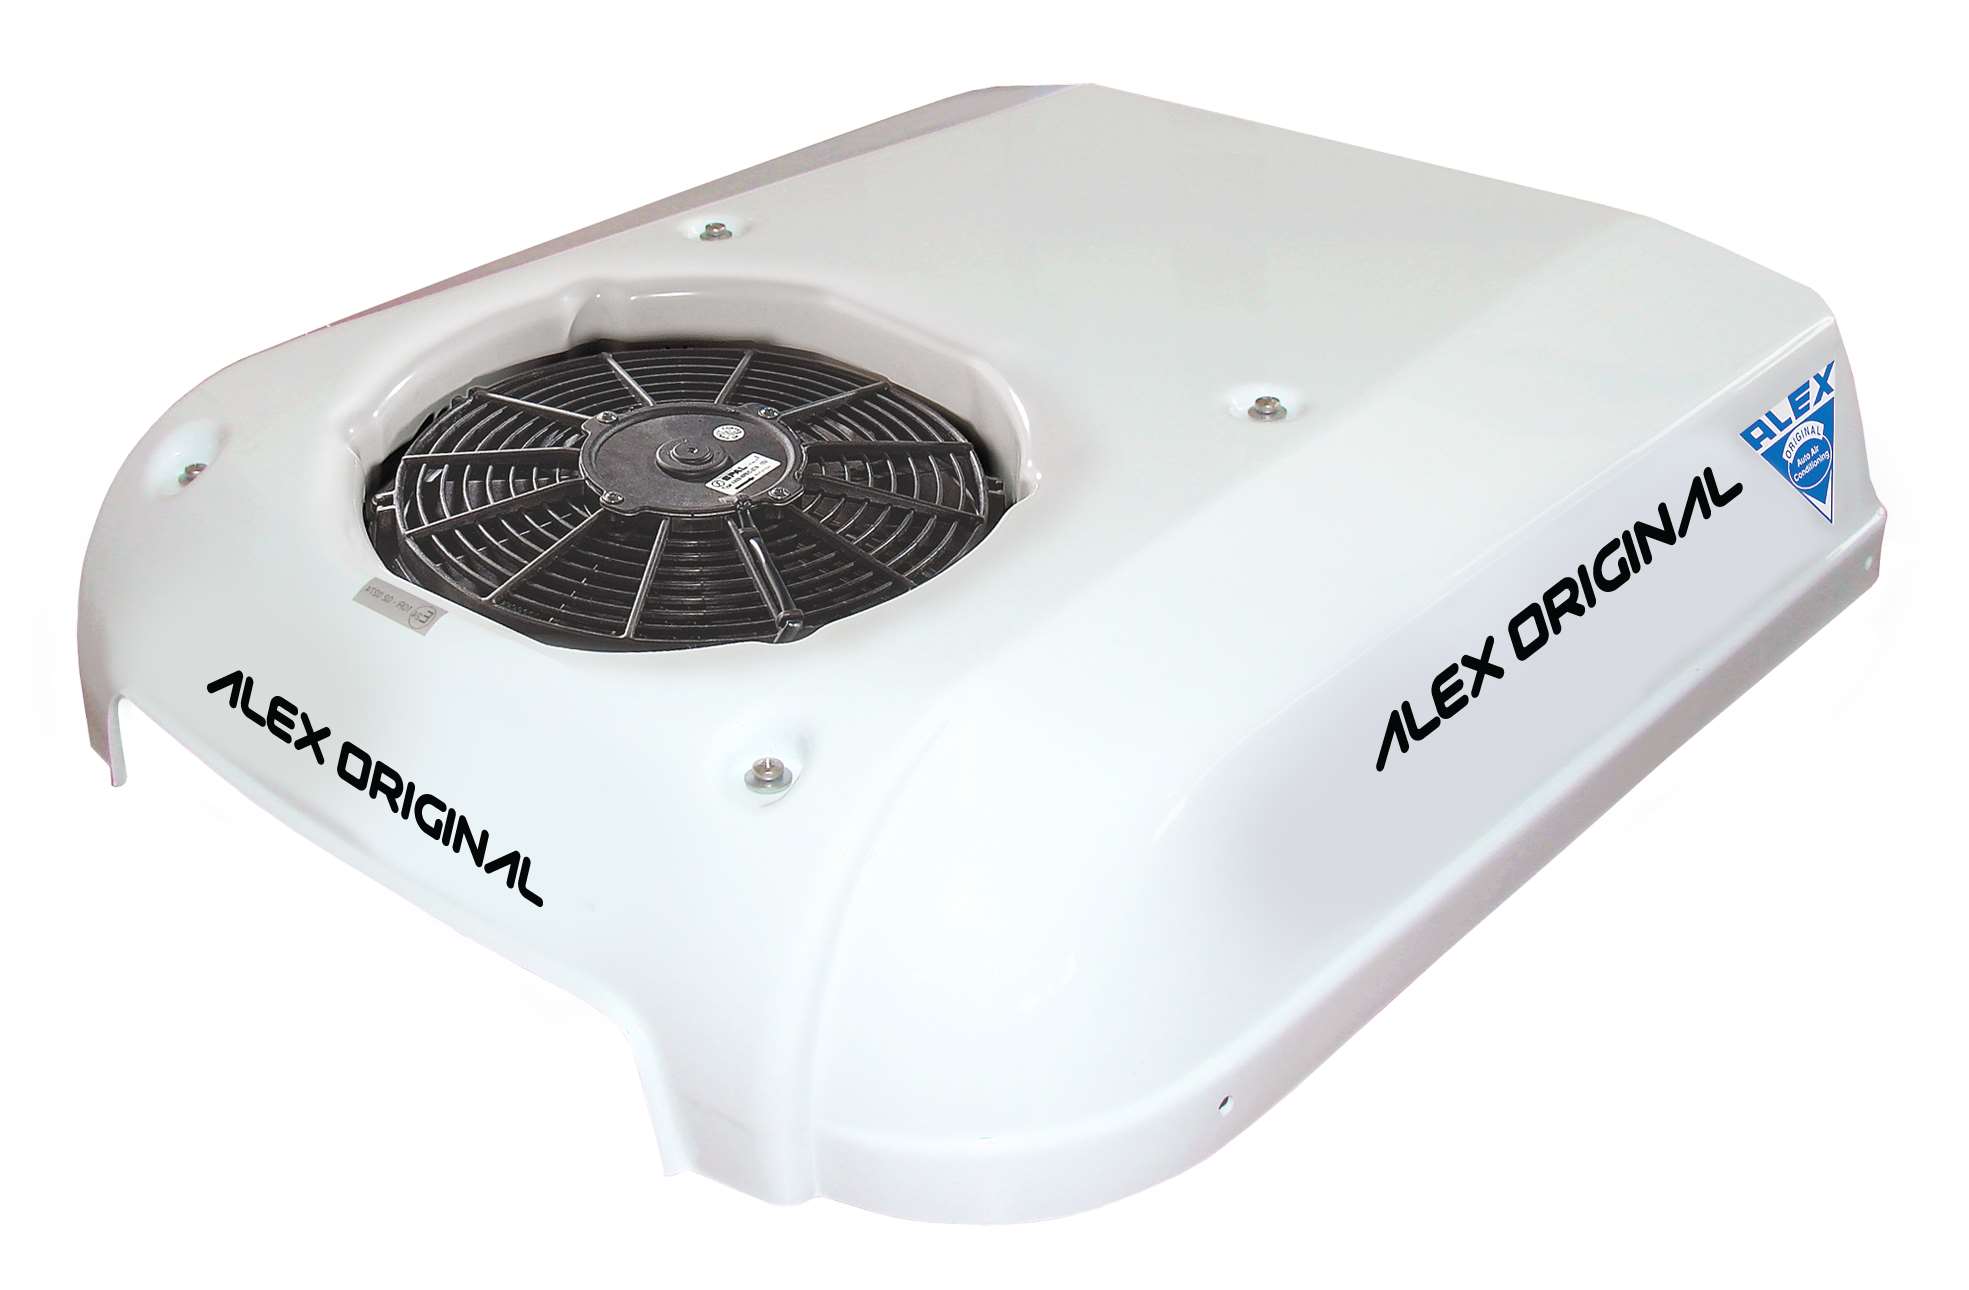 TA 0911 (3,5kW) roof air conditioner